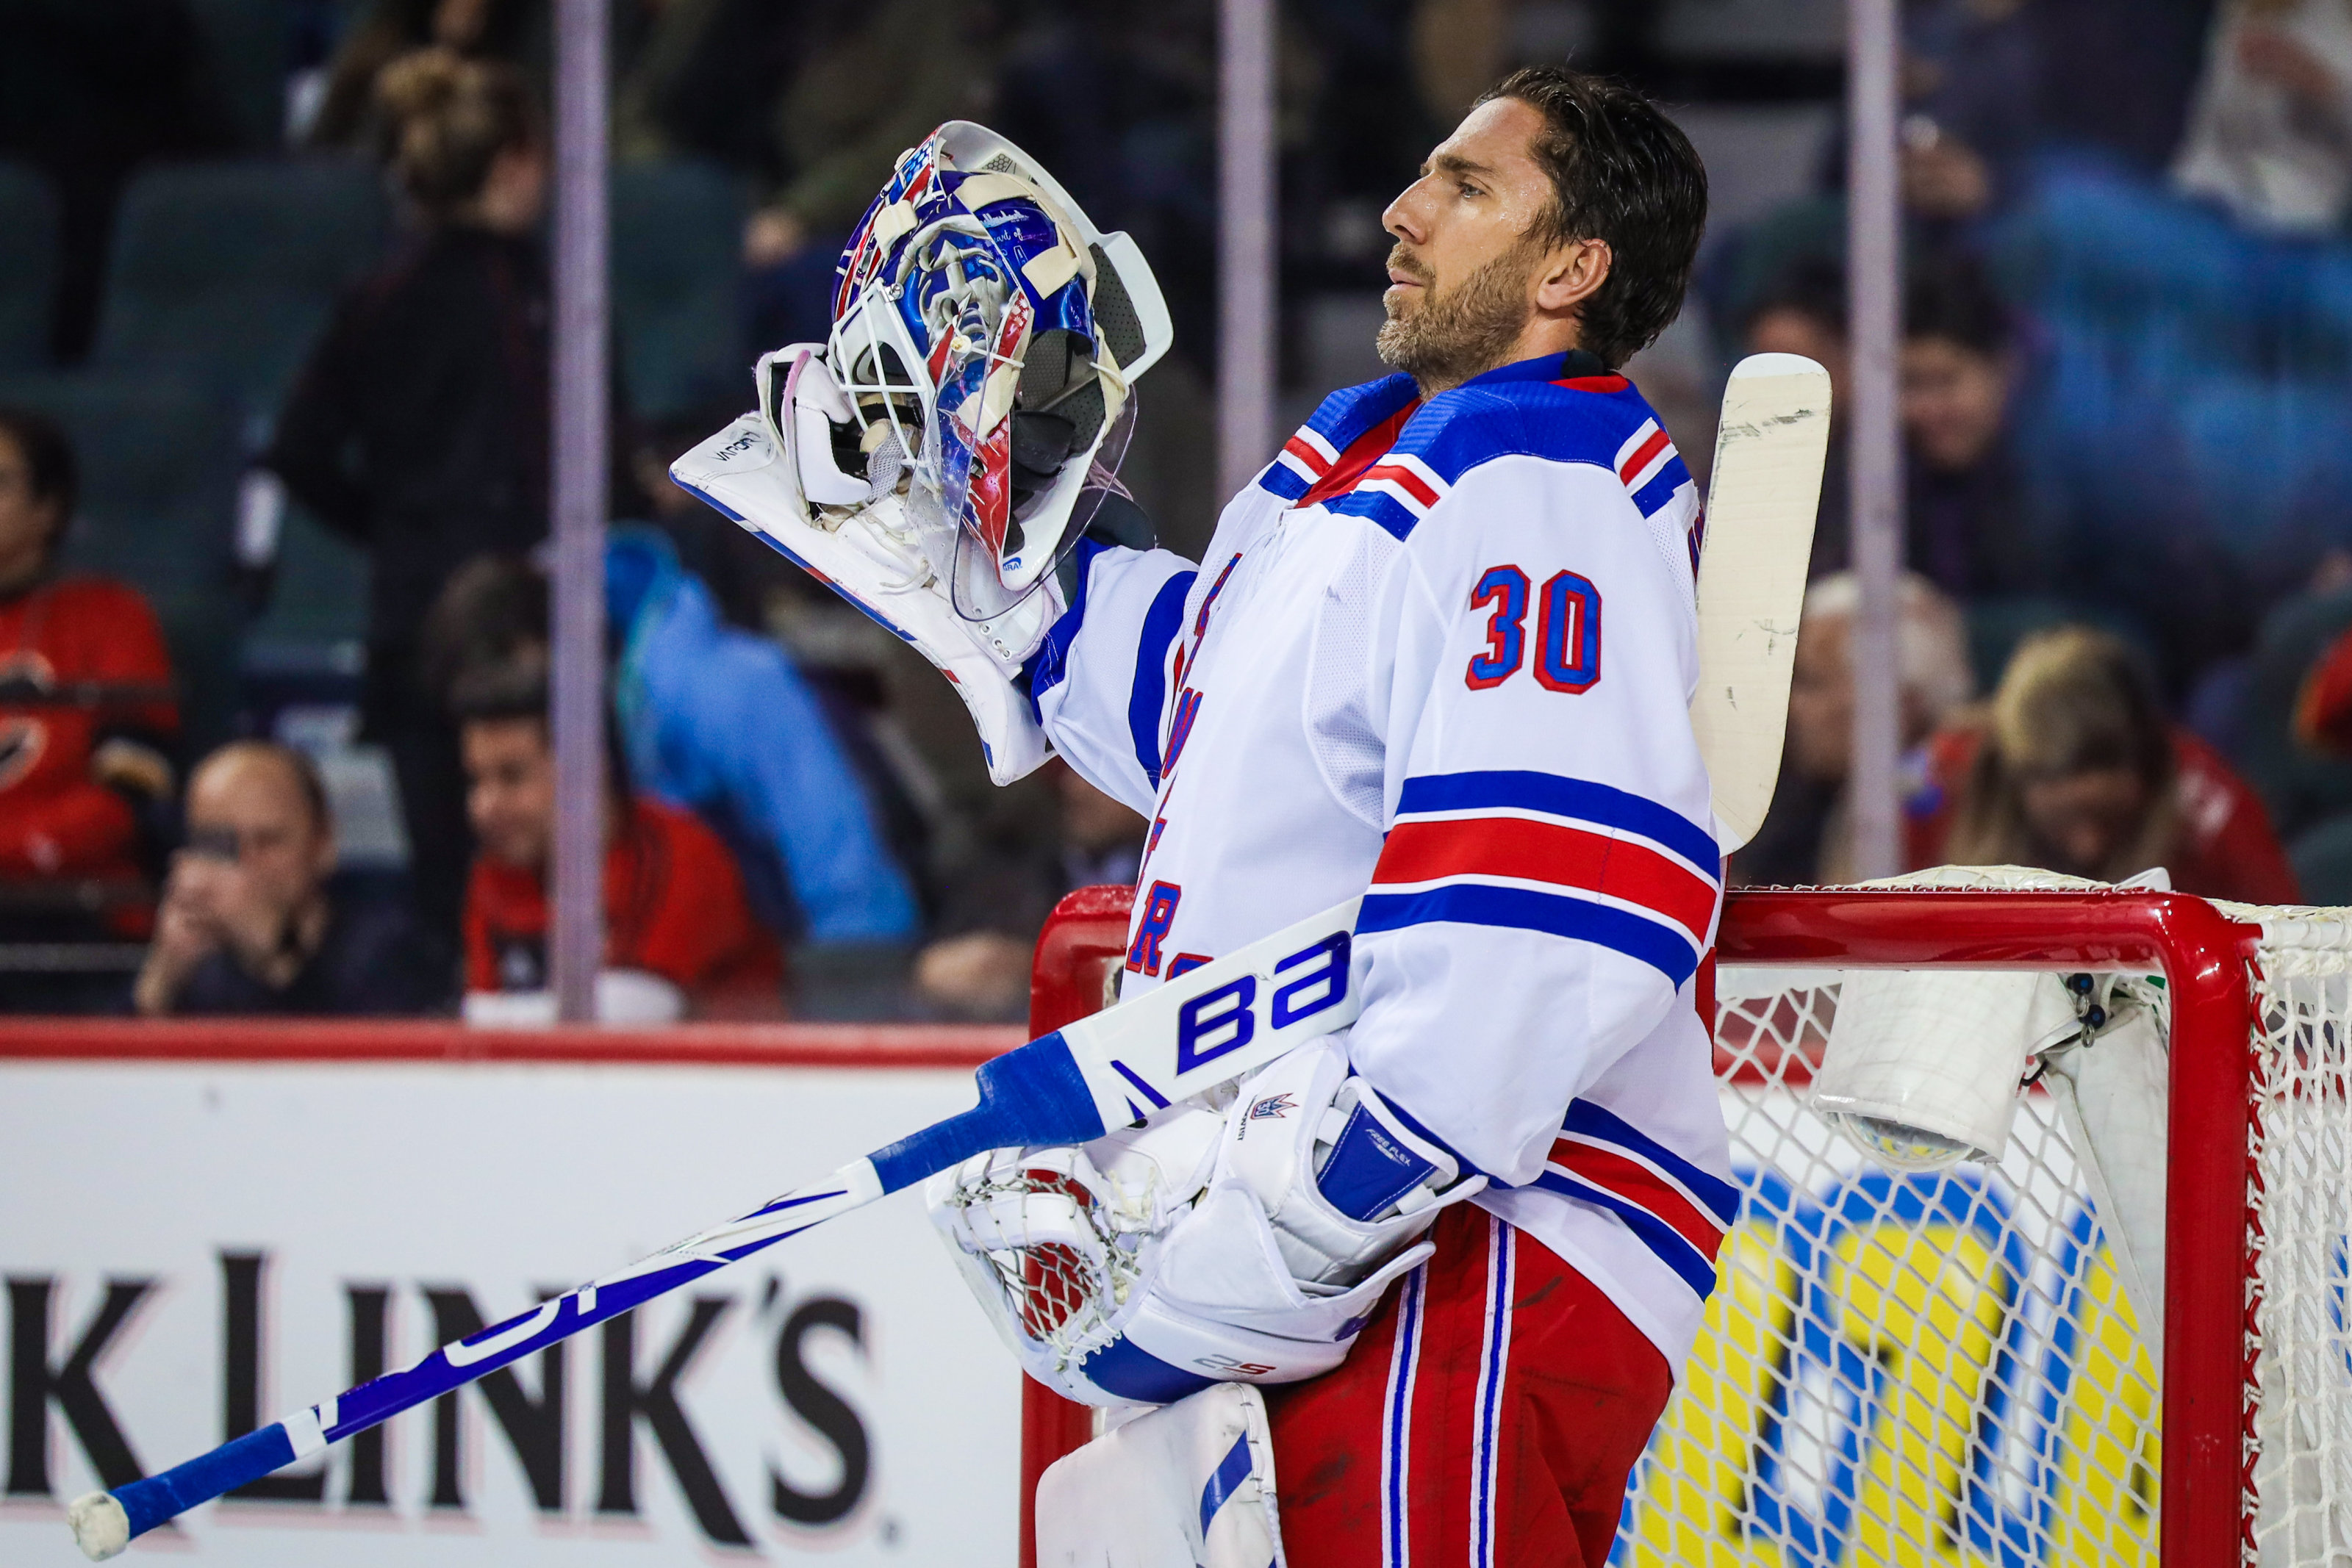 NYR/CBJ 10/13 Review: “Give Me Two Goals & I Got This” – Henrik